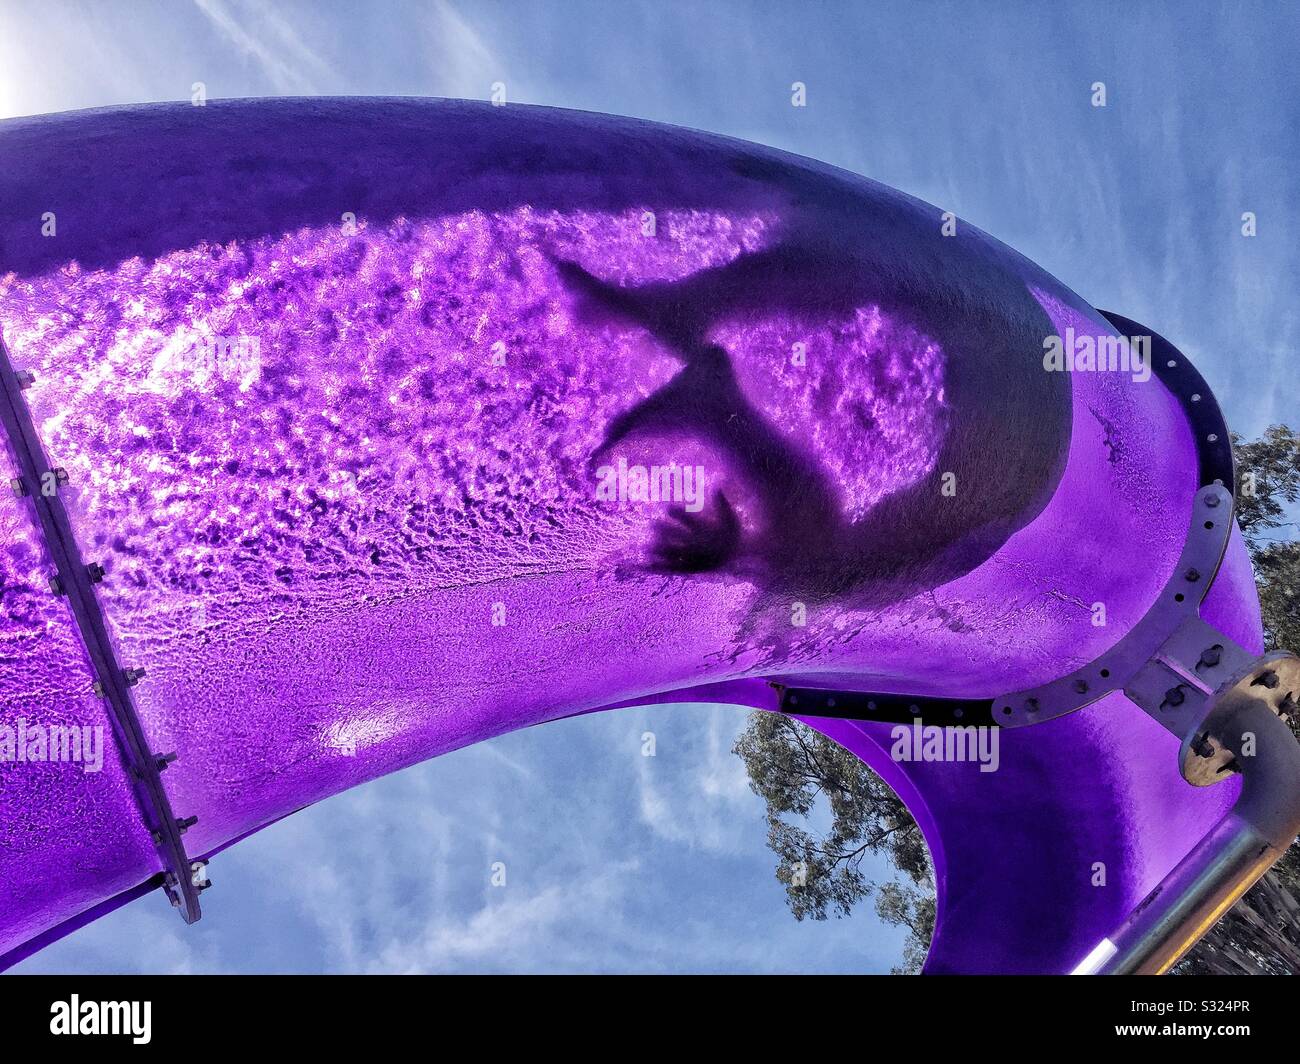 Summer vacation fun, silhouette of adult sliding down purple water slide. Stock Photo